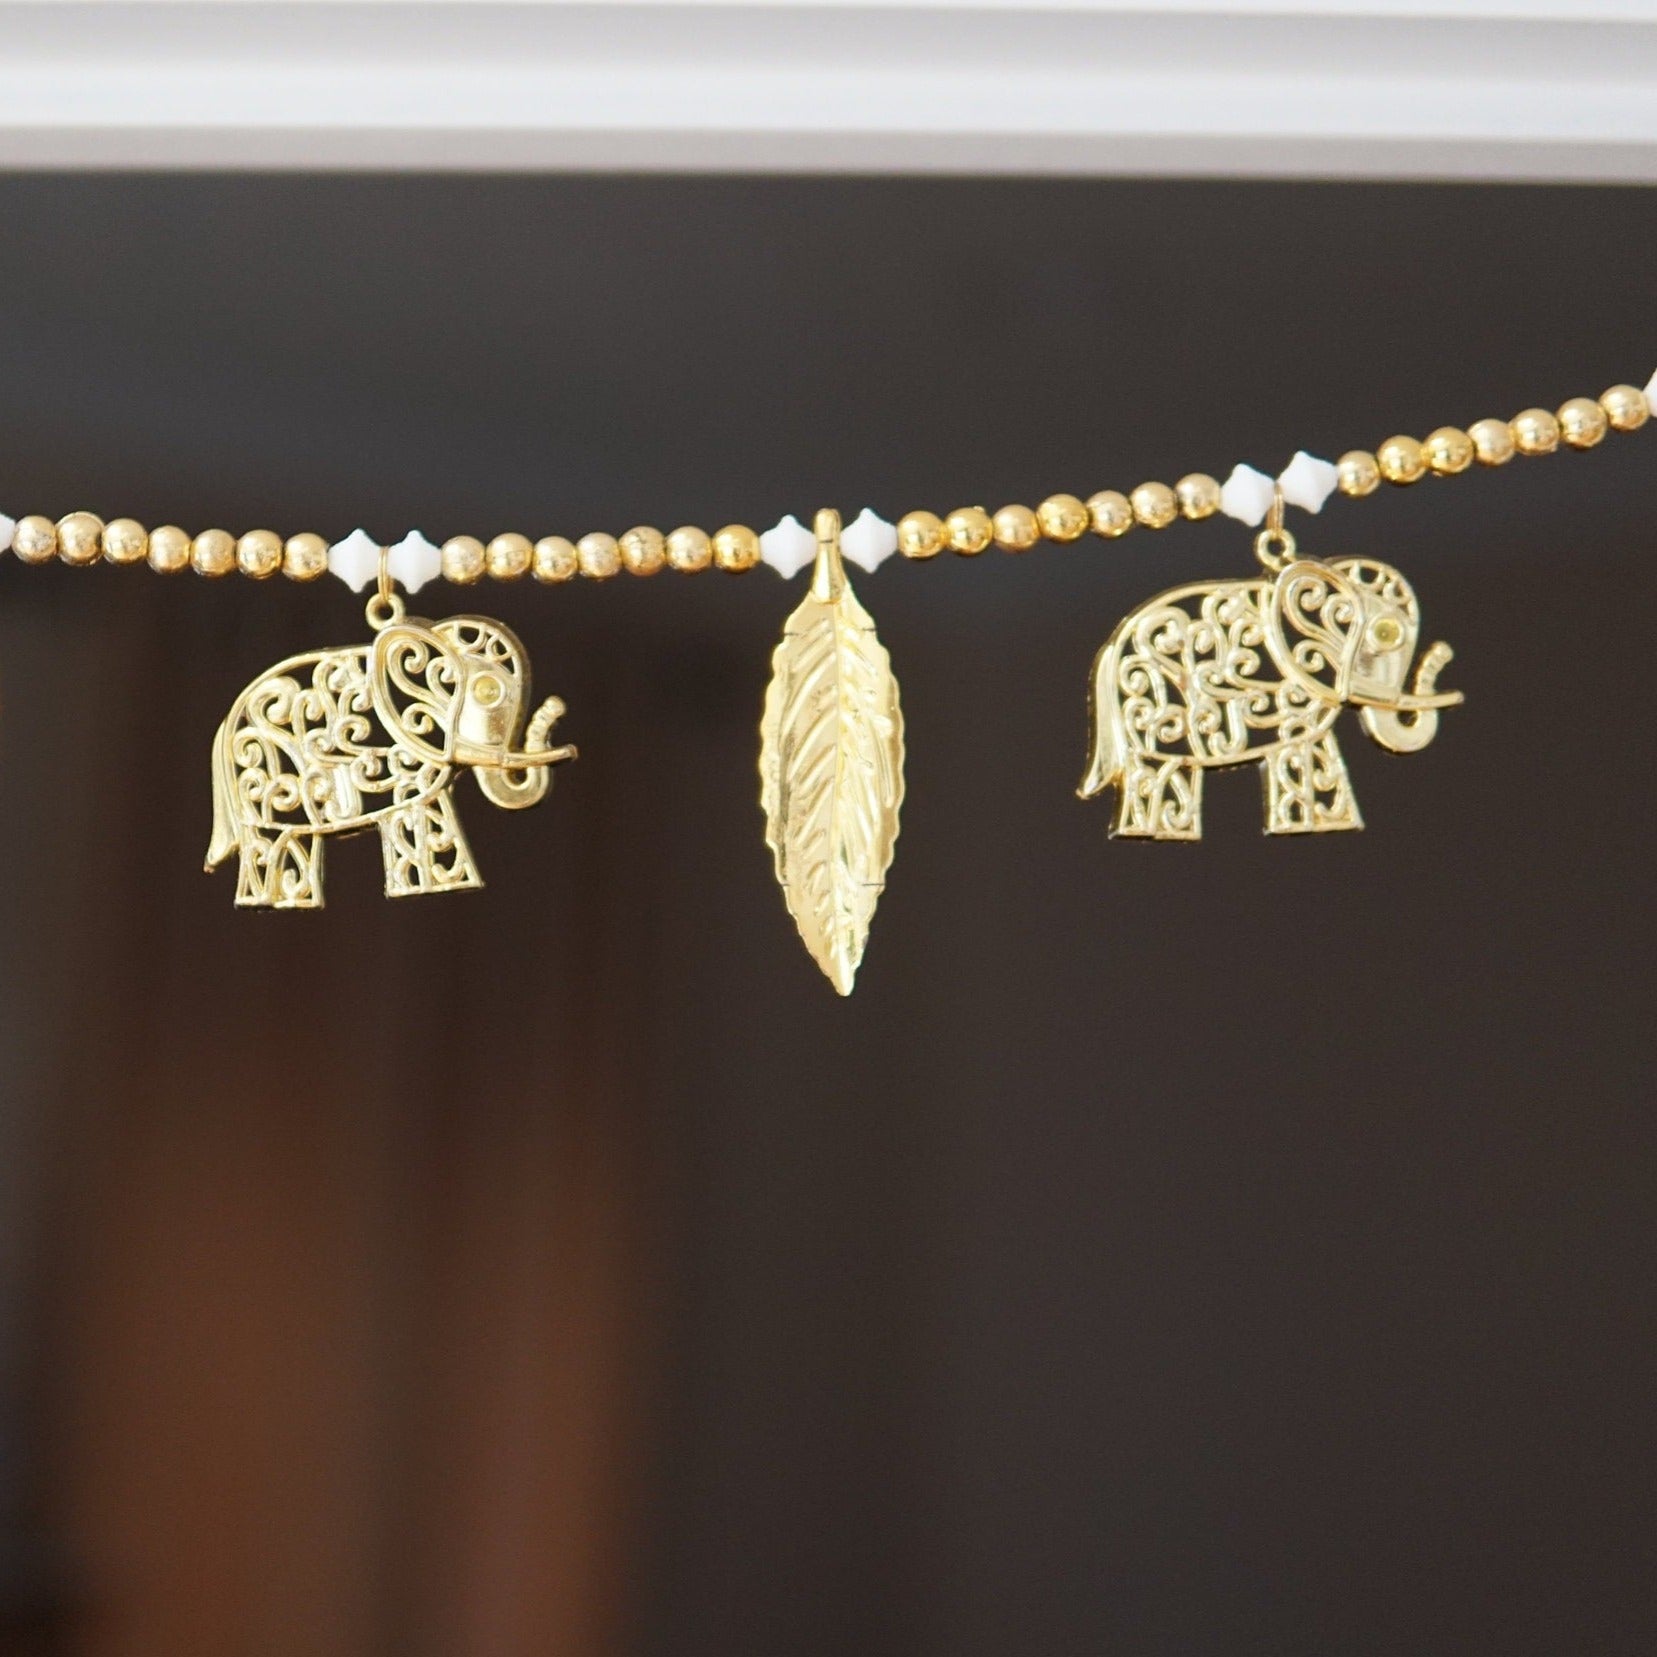 golden elphant toran with white and gold bead and leaves. Beautiful toran for Diwali, house warming and auspicious events and gift giving